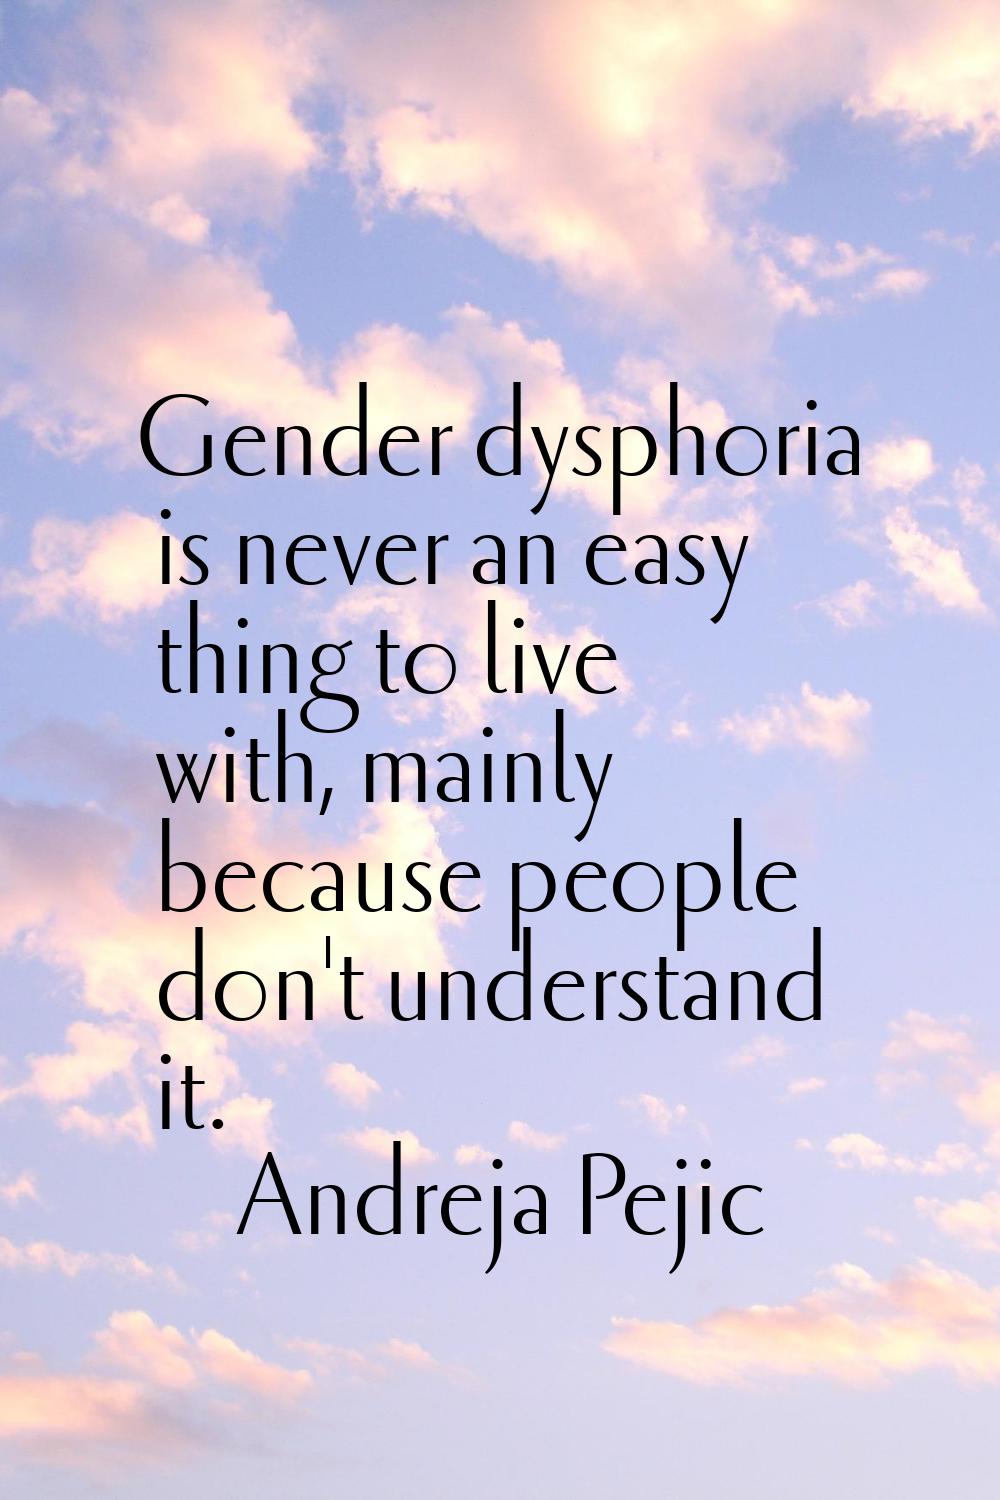 Gender dysphoria is never an easy thing to live with, mainly because people don't understand it.